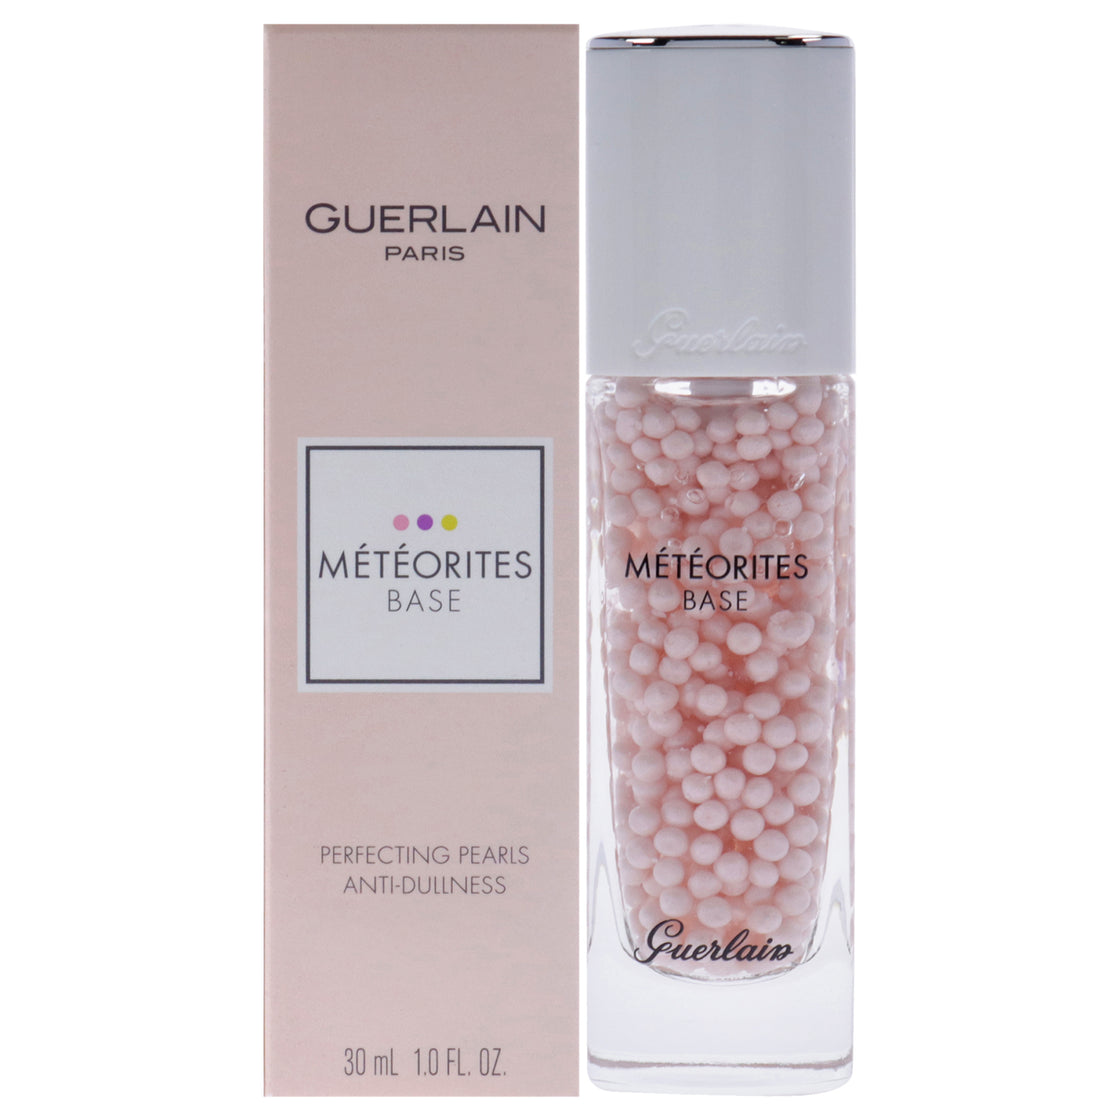 Meteorites Base Perfecting Pearls by Guerlain for Women - 1 oz Foundation